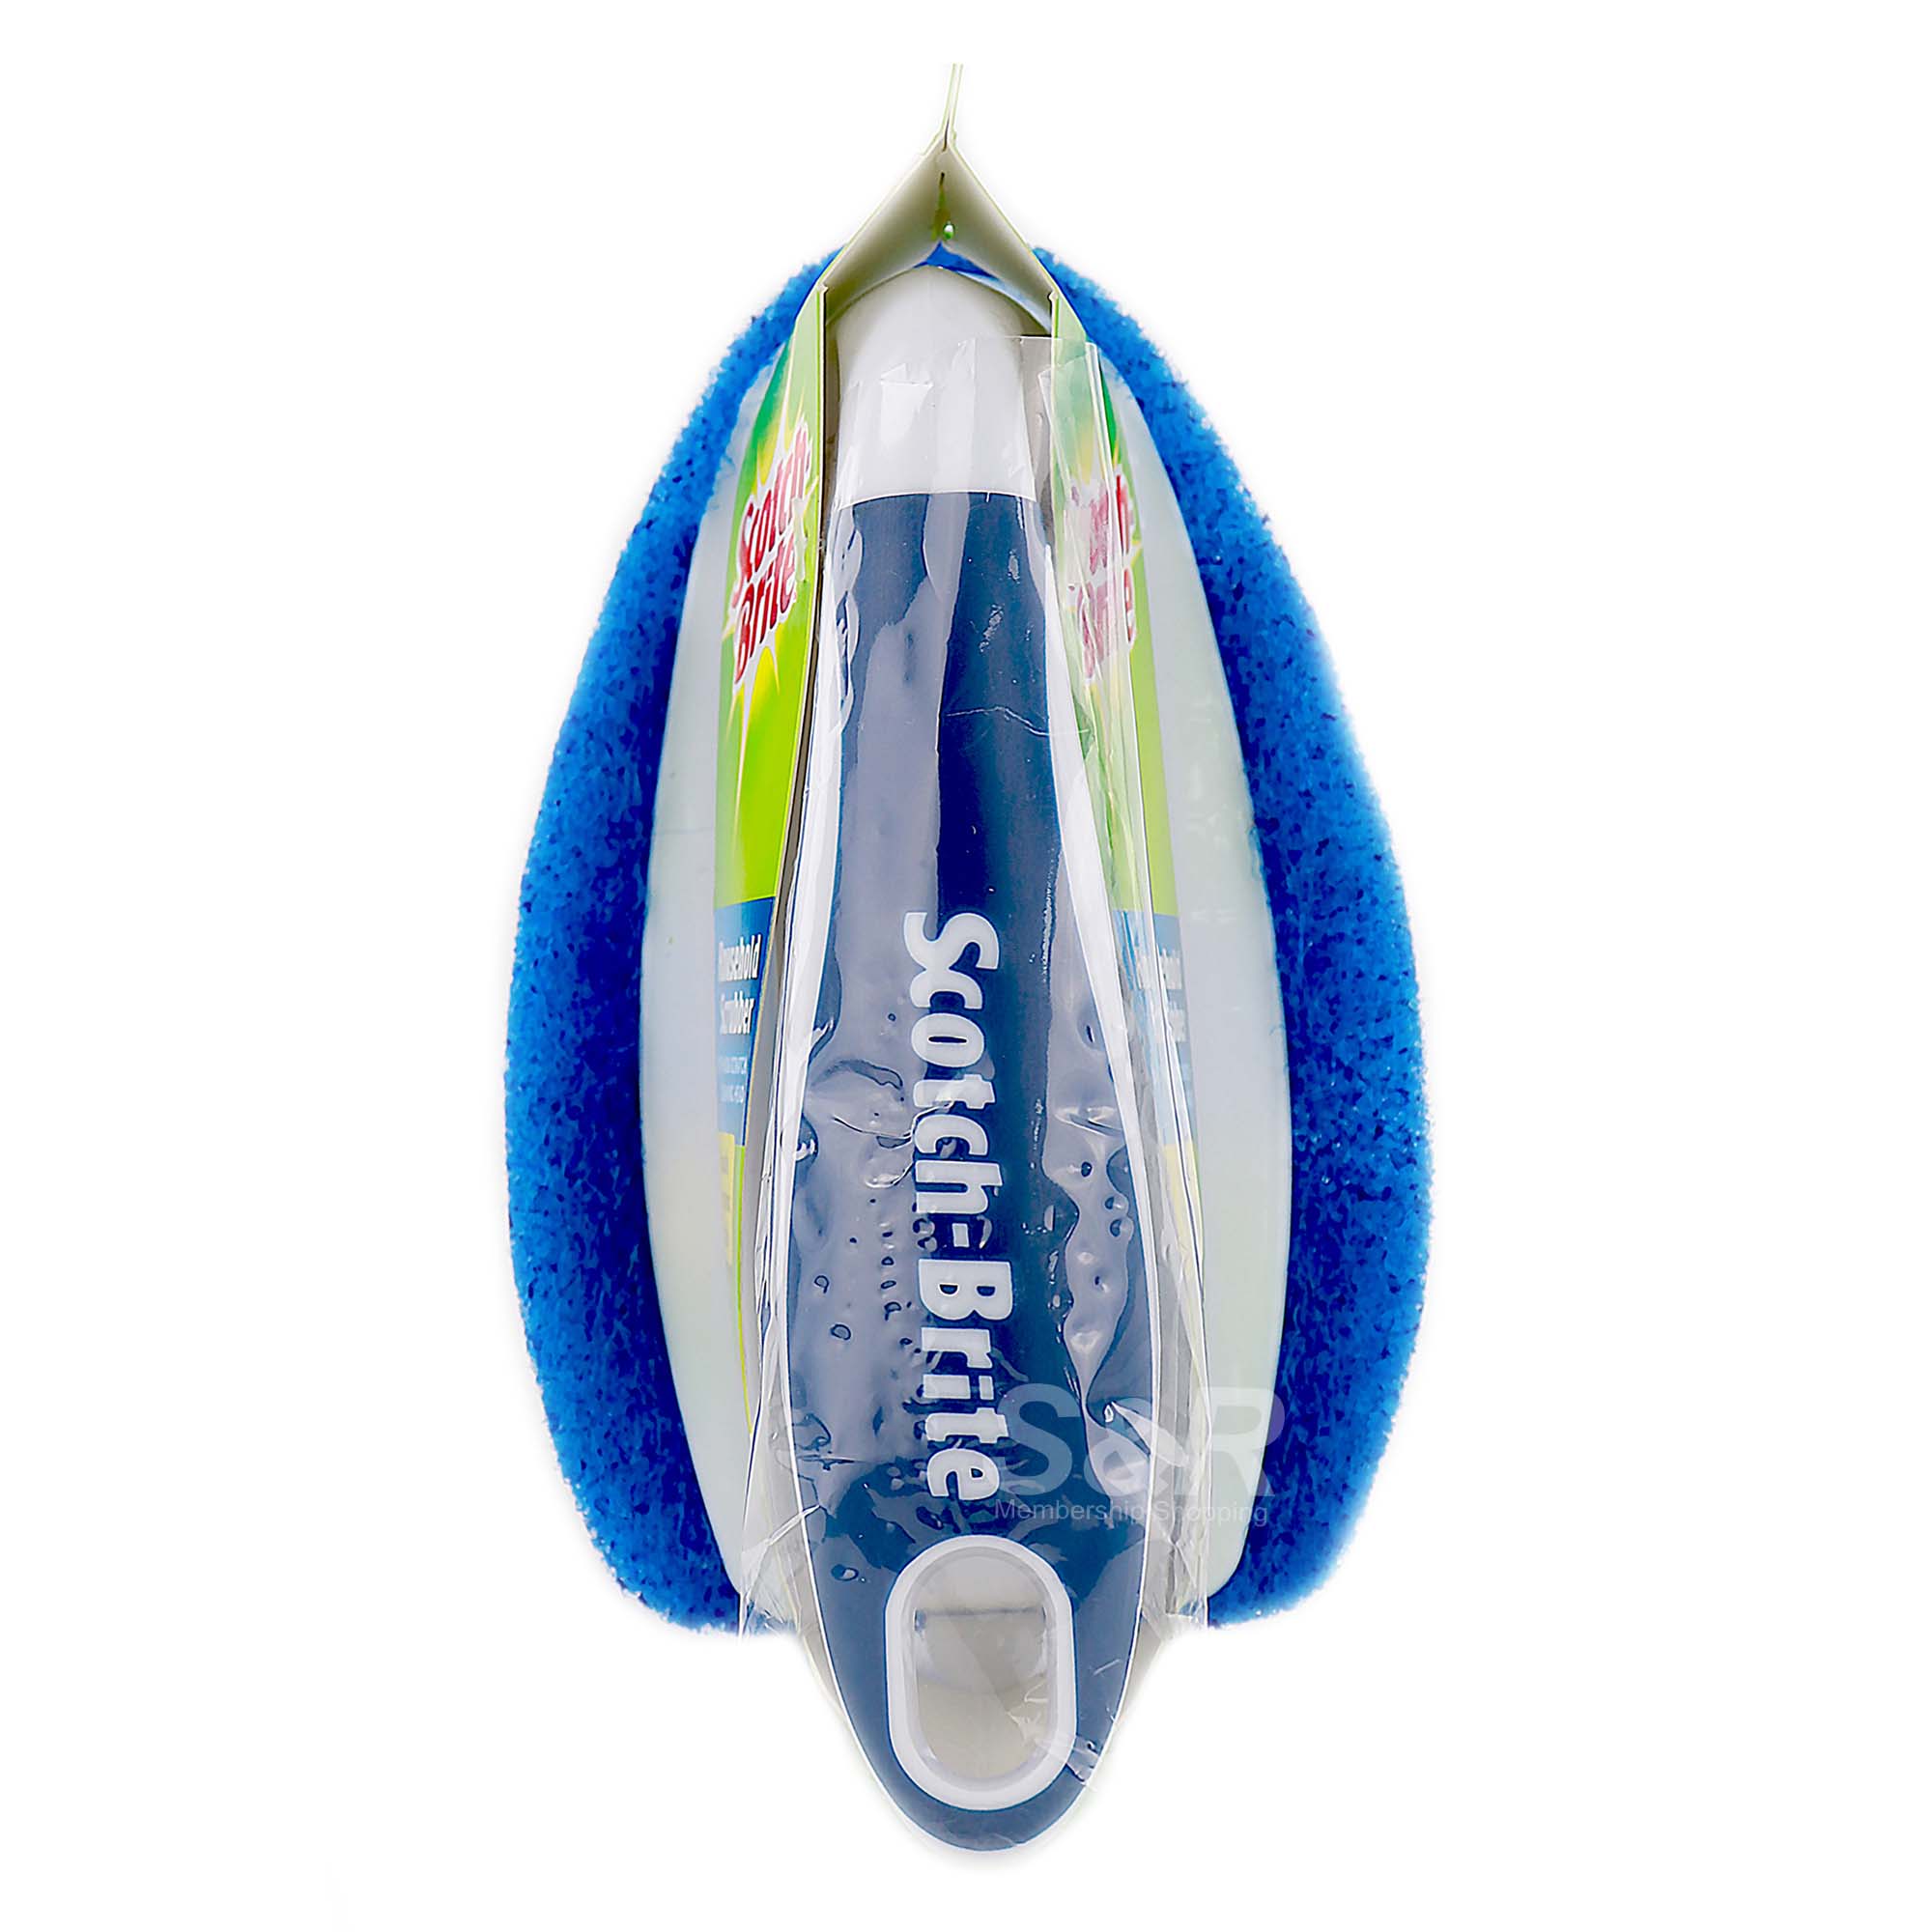 Scotch-Brite Household Scrubber with Non Scratch Cleaning Head 1pc